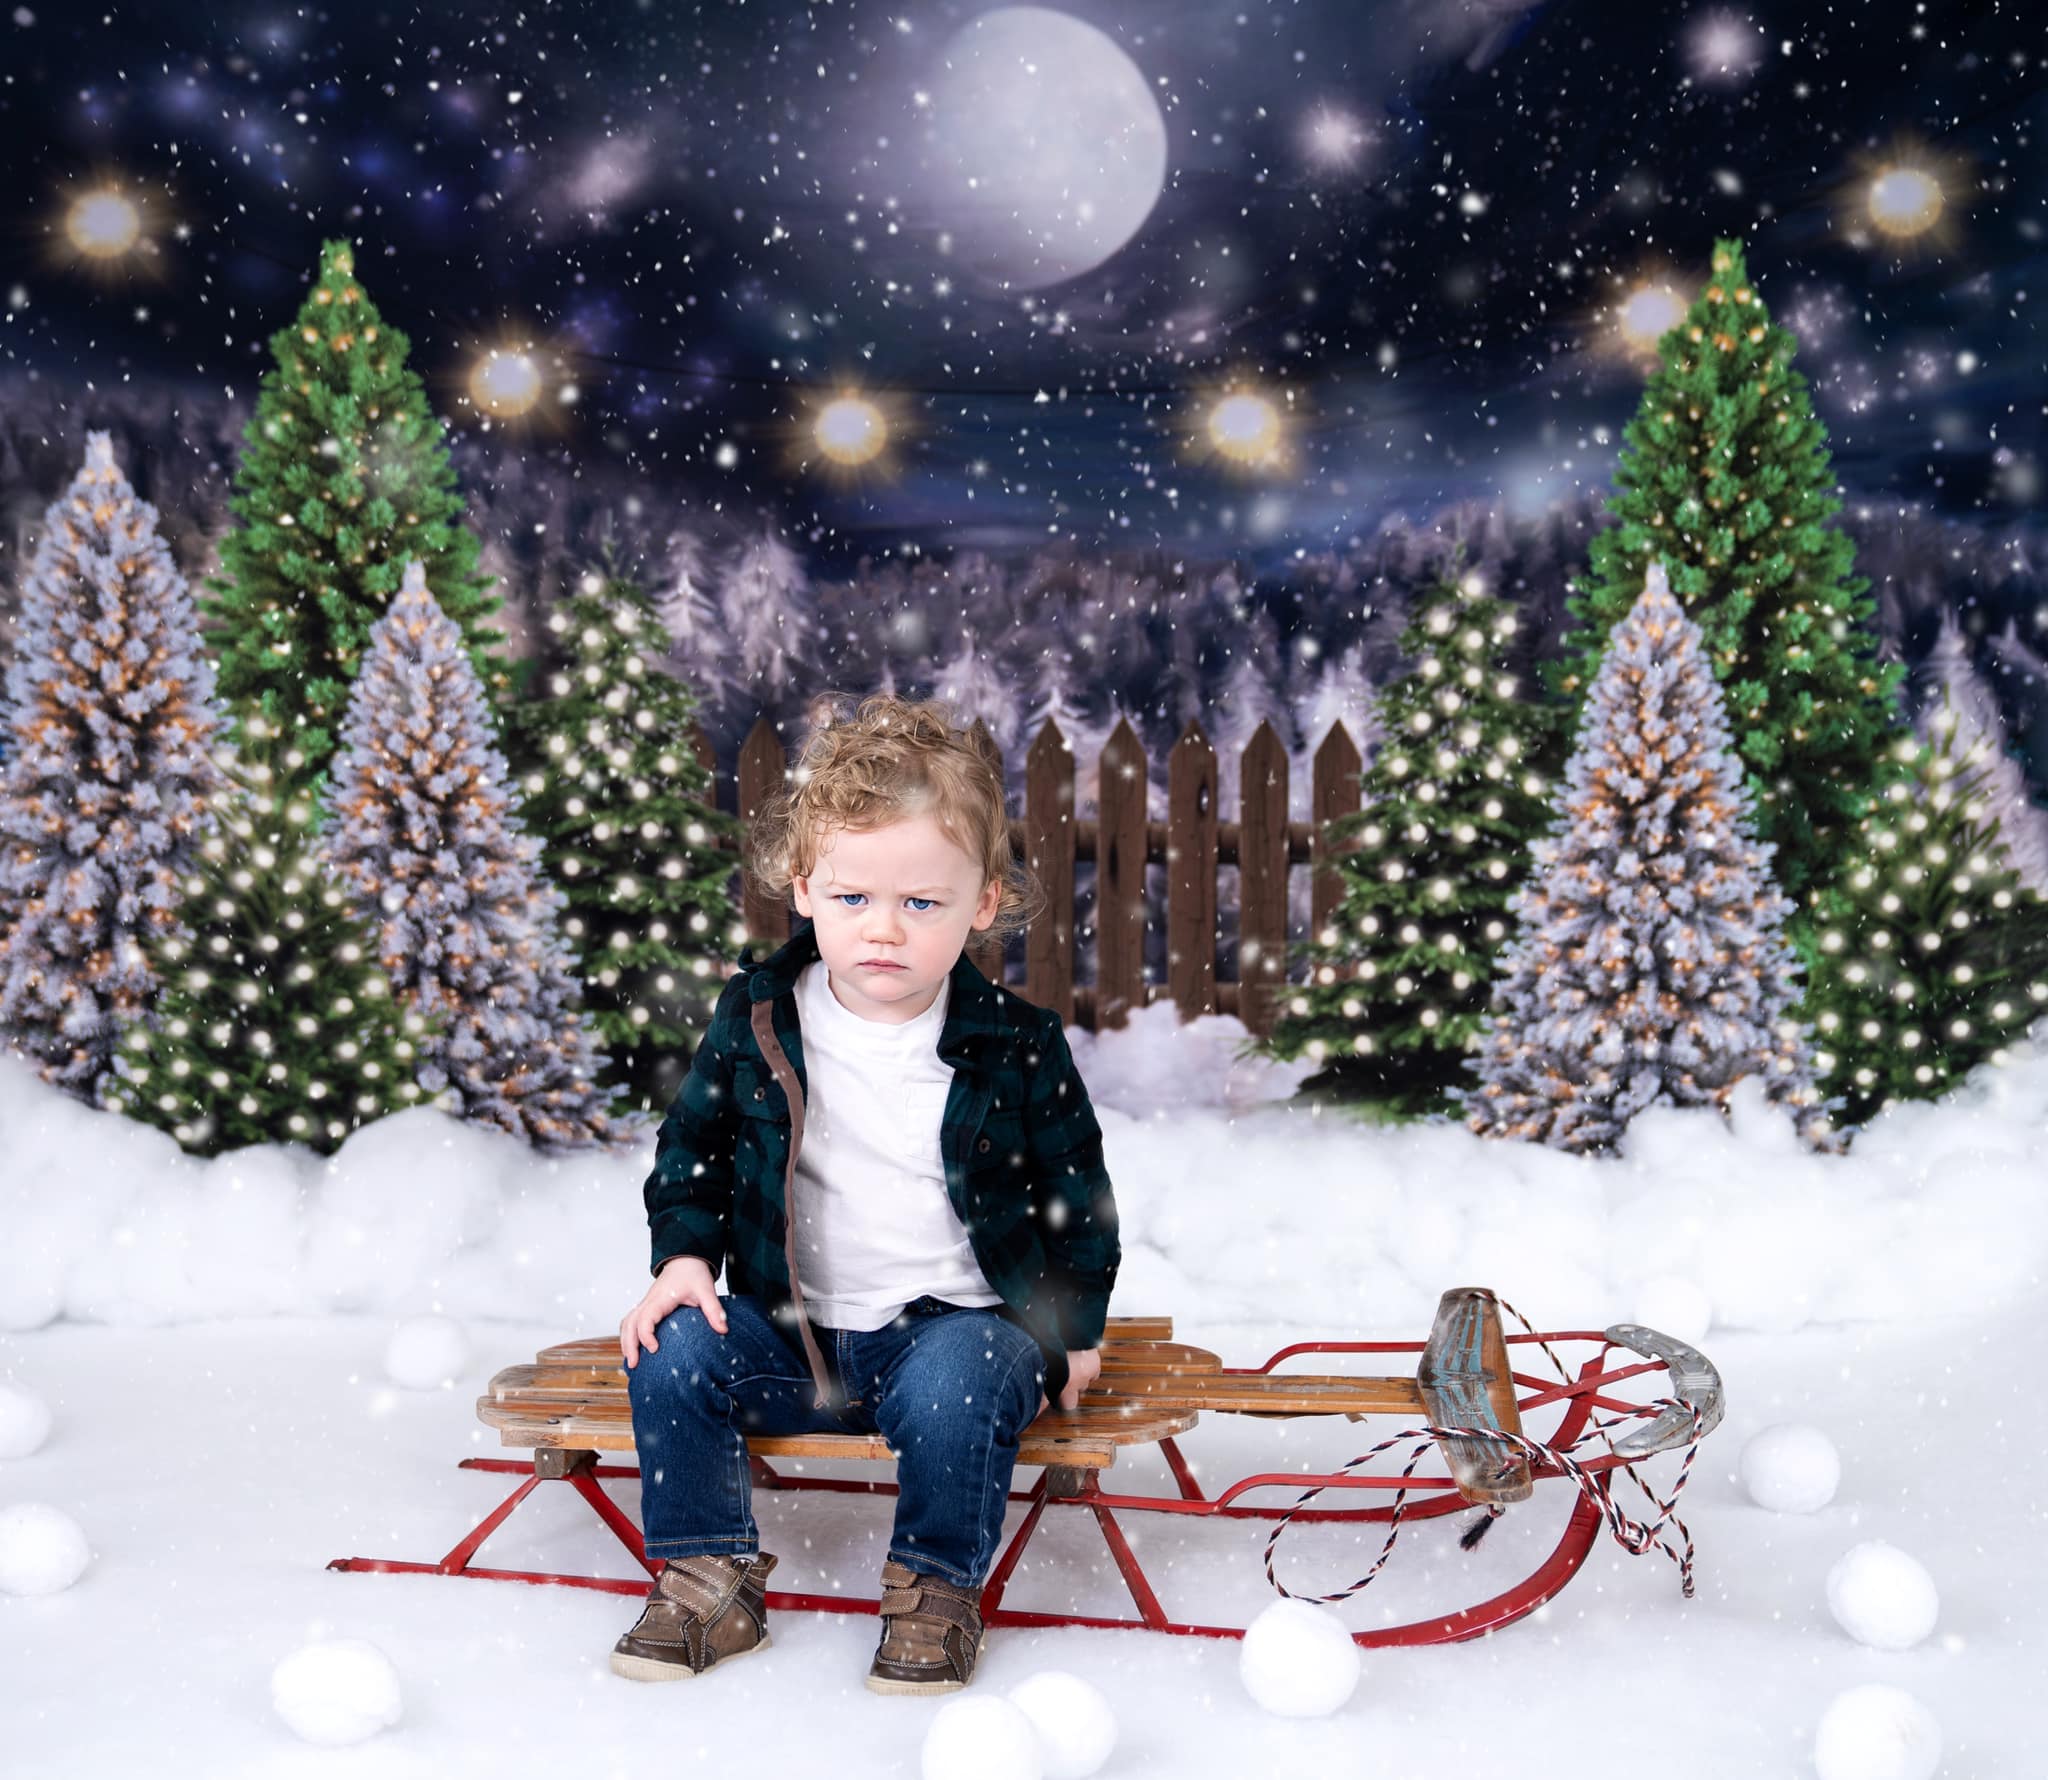 Kate Christmas Night Pine Trees Farm Winter Backdrop Designed By Jerry_Sina